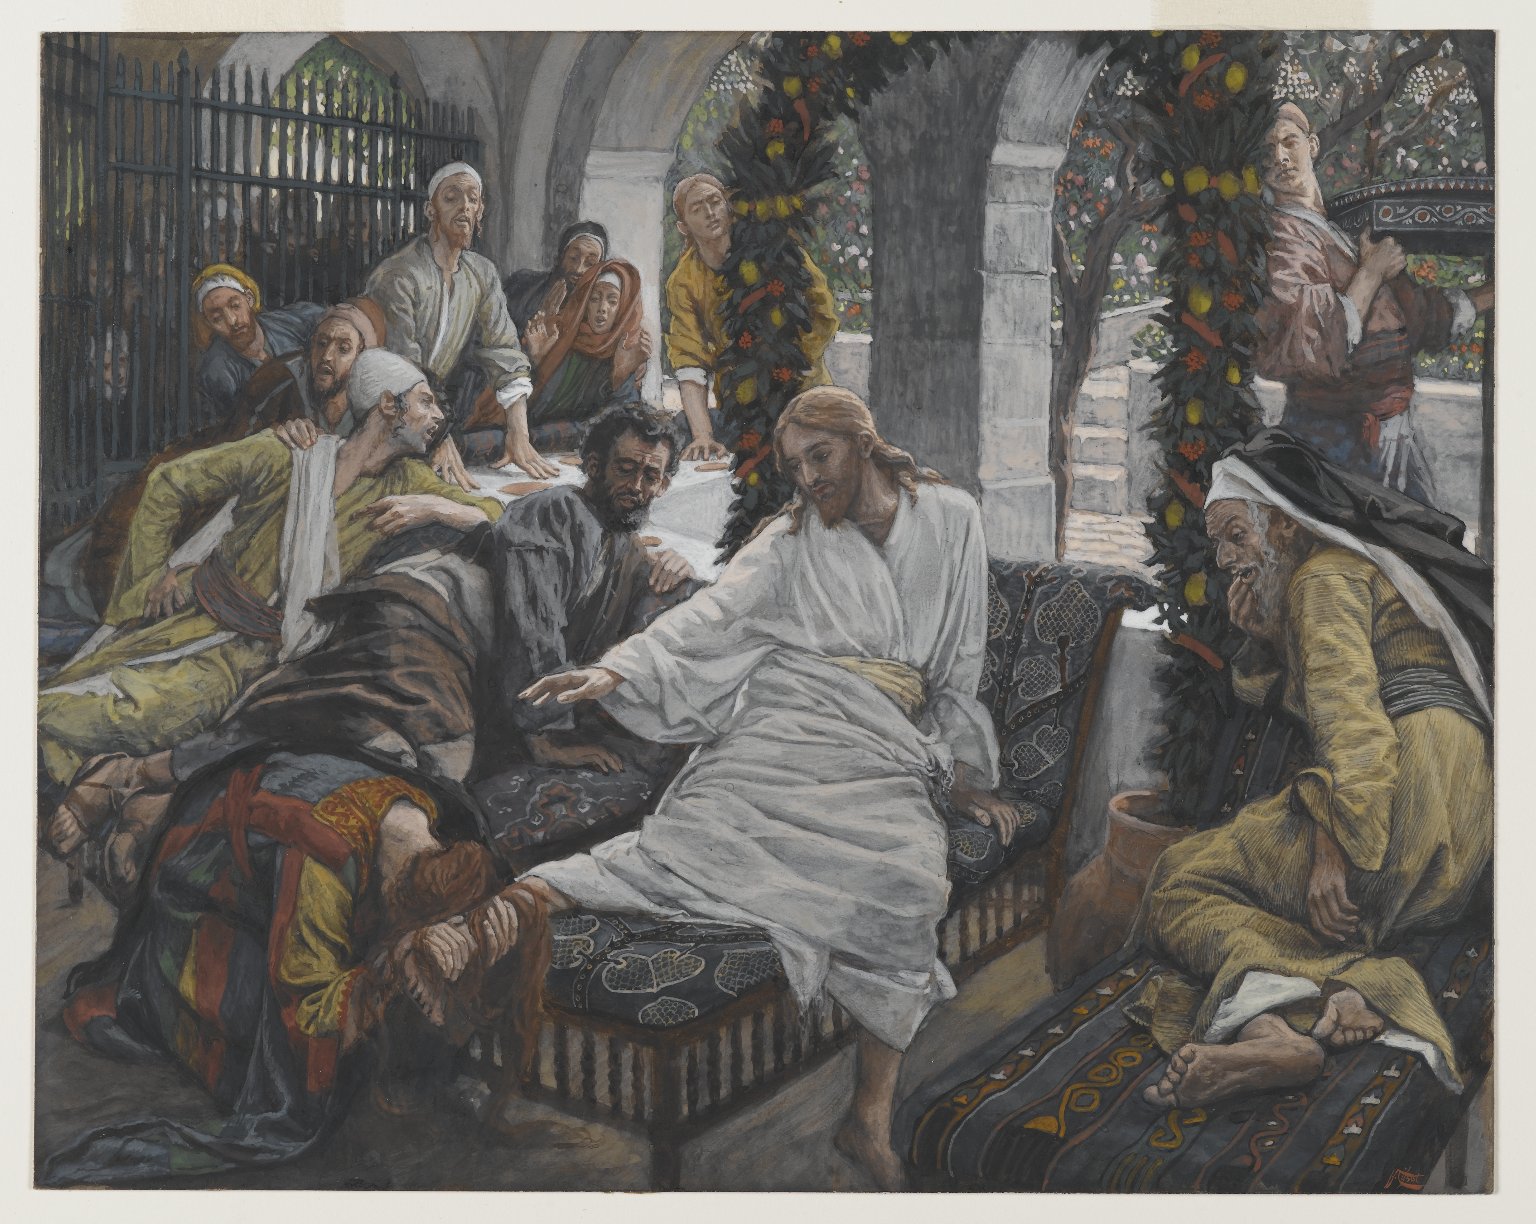 'The Ointment of the Magdalene' by James Tissot